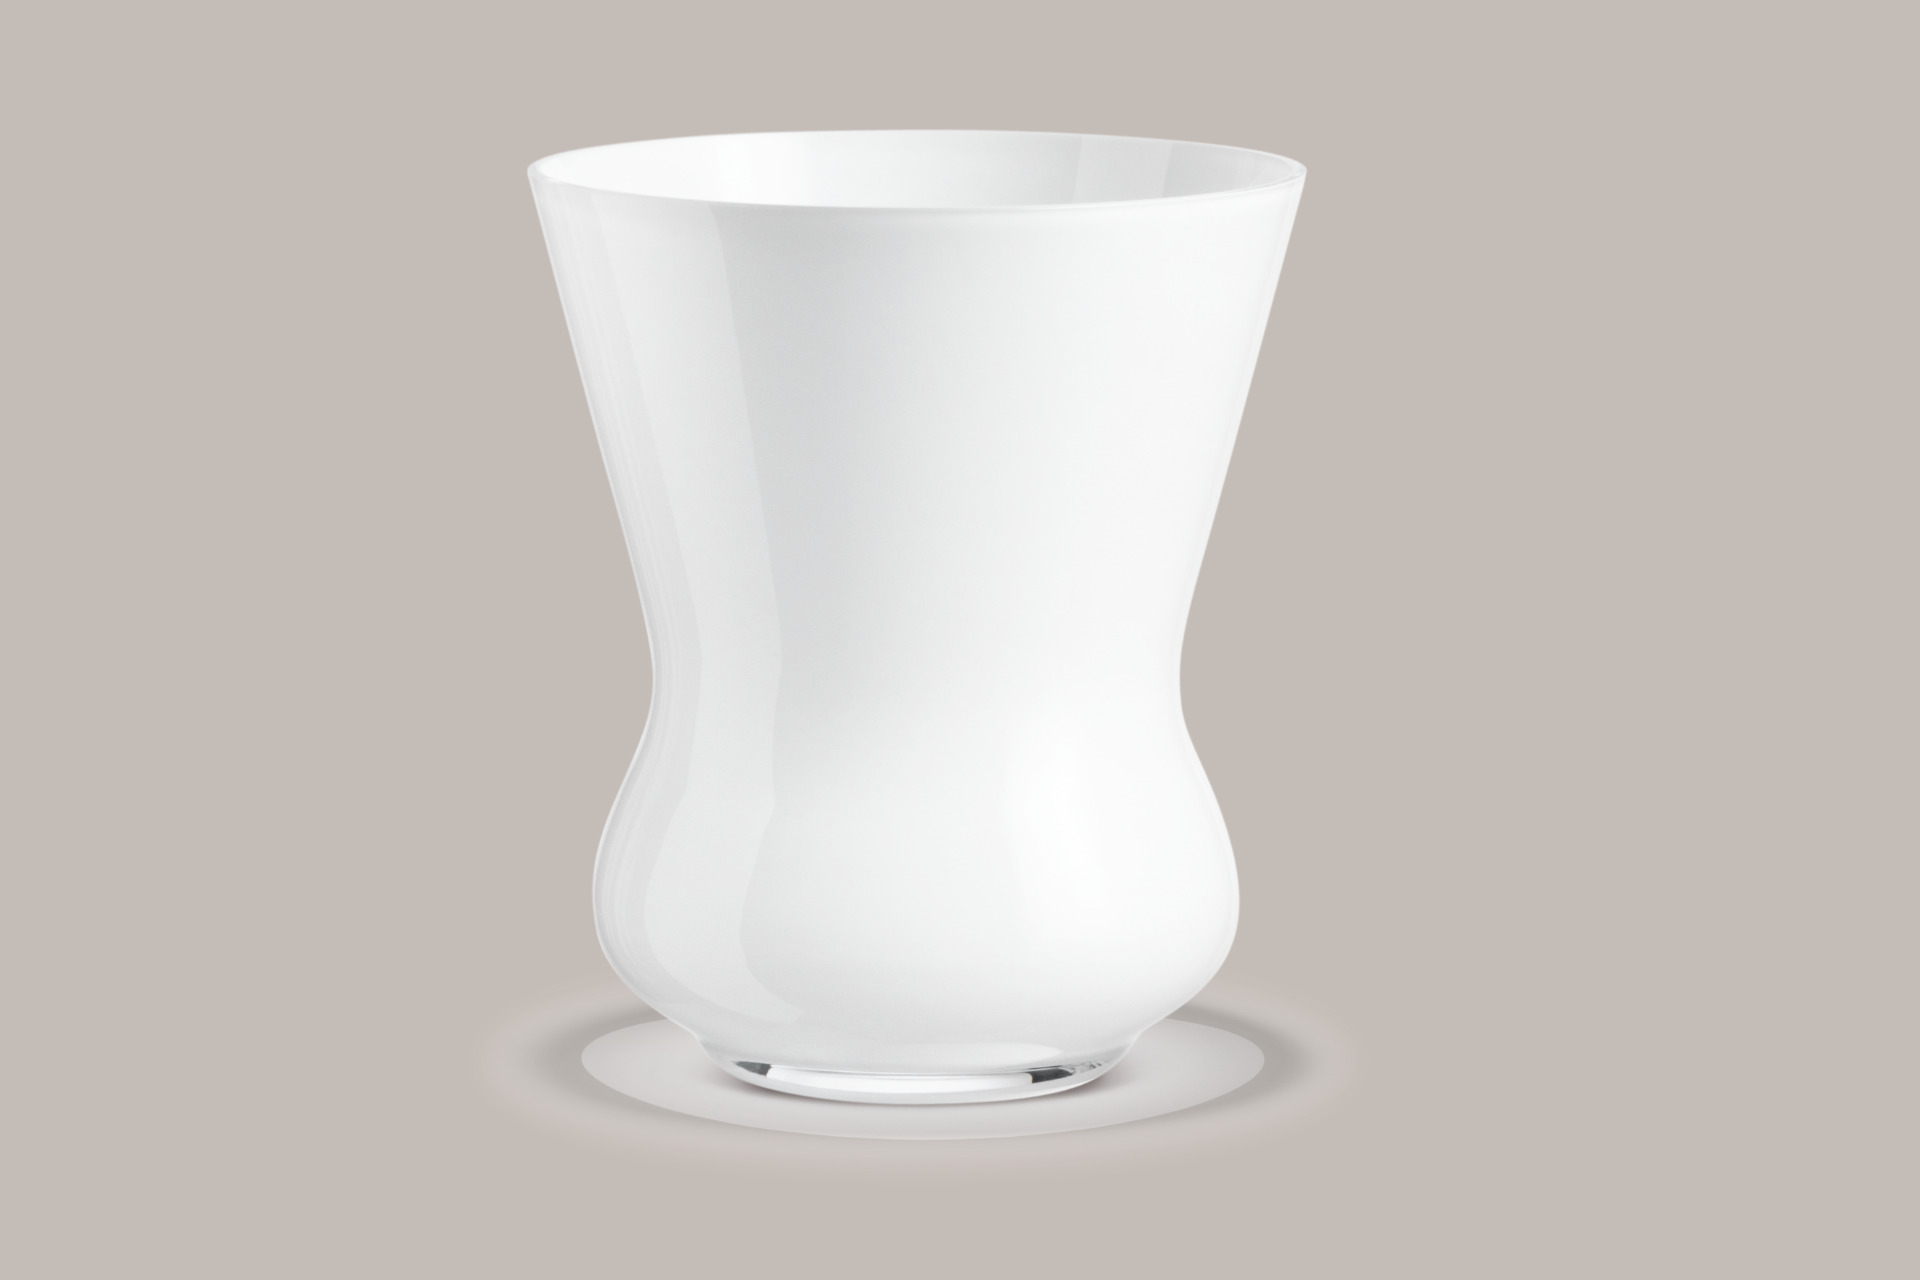 White JEB 65 vase from Holmegaard